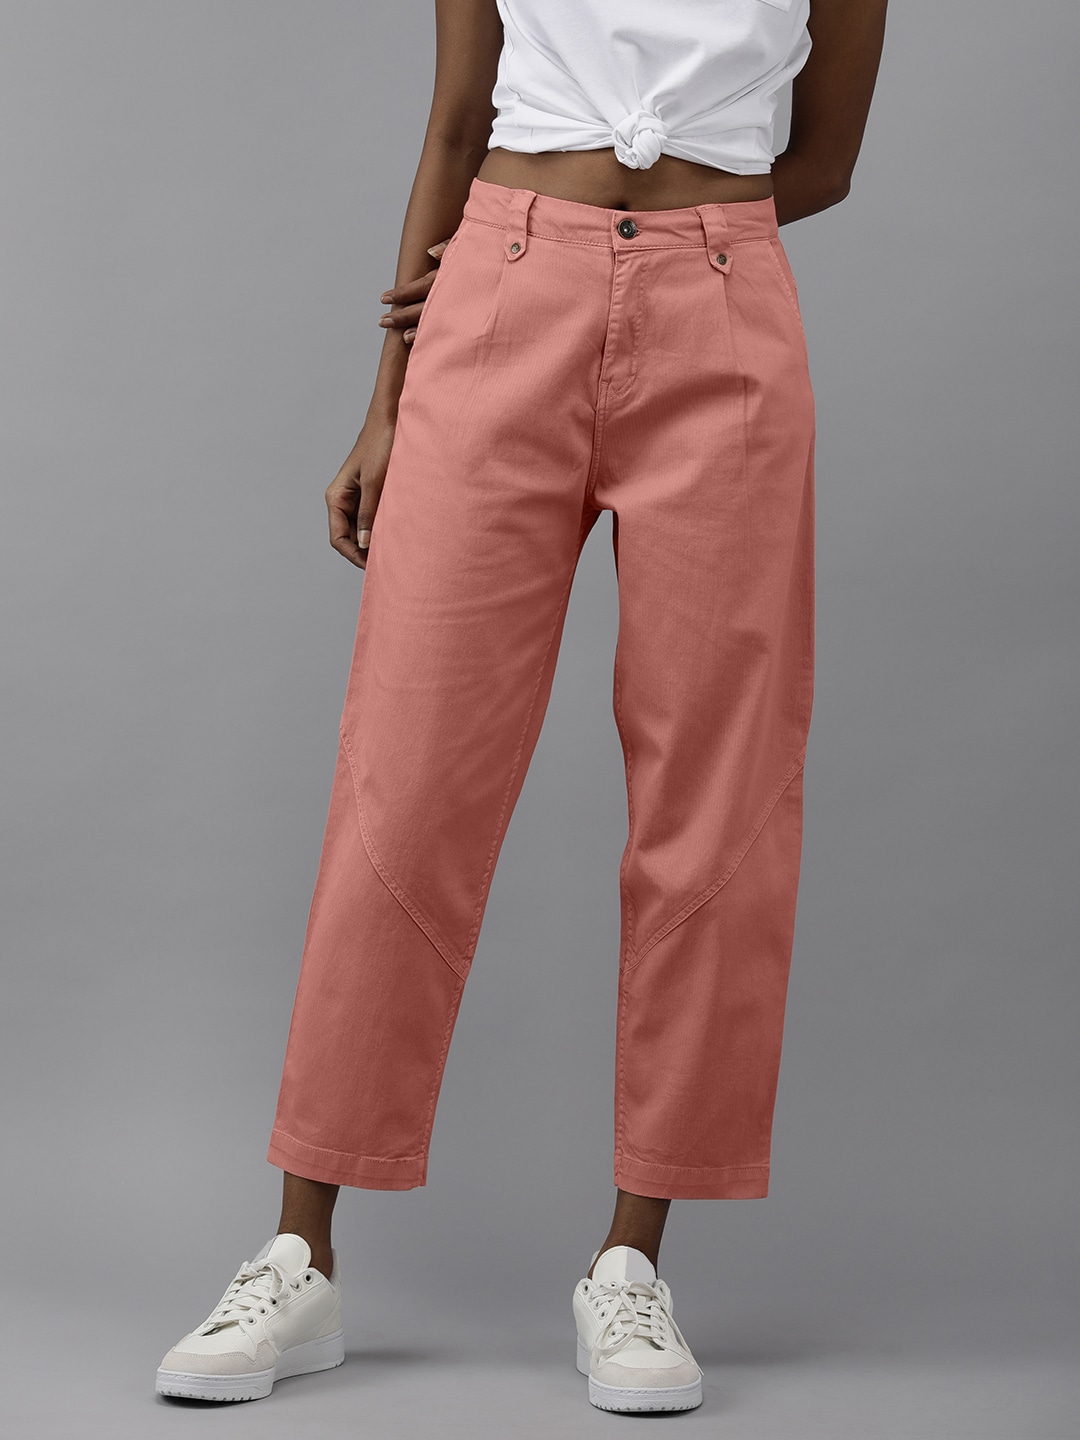 The Roadster Lifestyle Co Women Peach-Coloured Solid Trousers Price in India